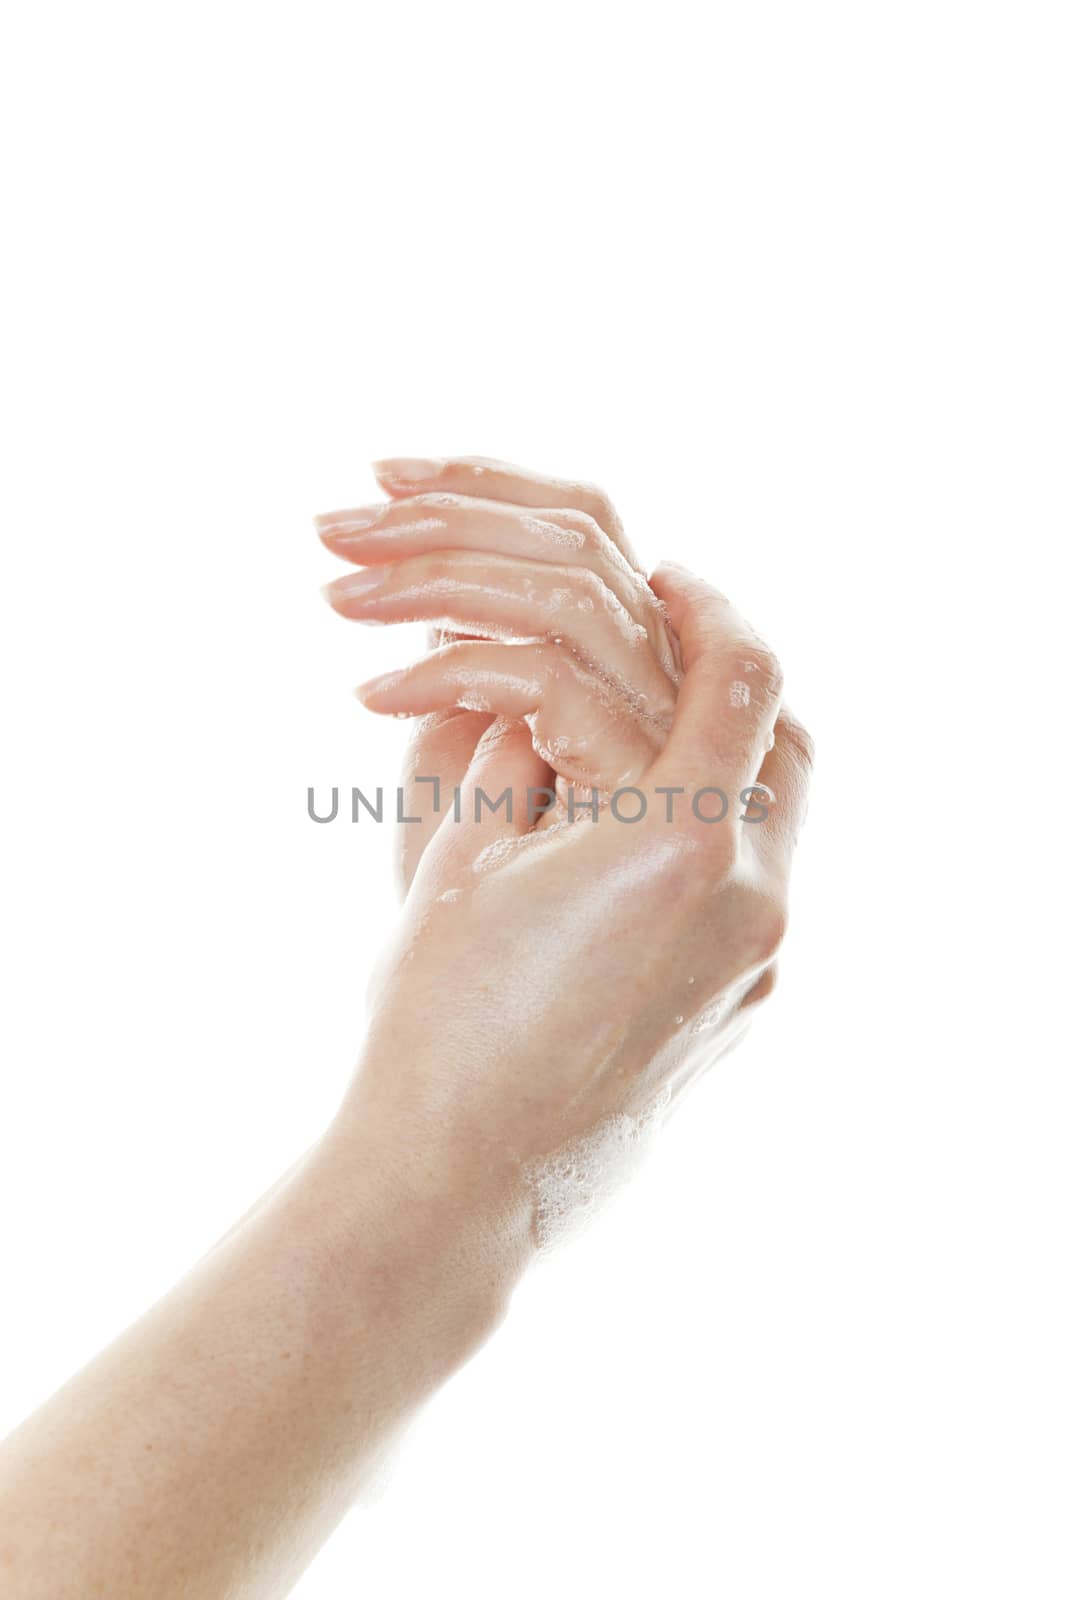 Washing hands in soapy water to stop the spread of germs.  Shot on white background.